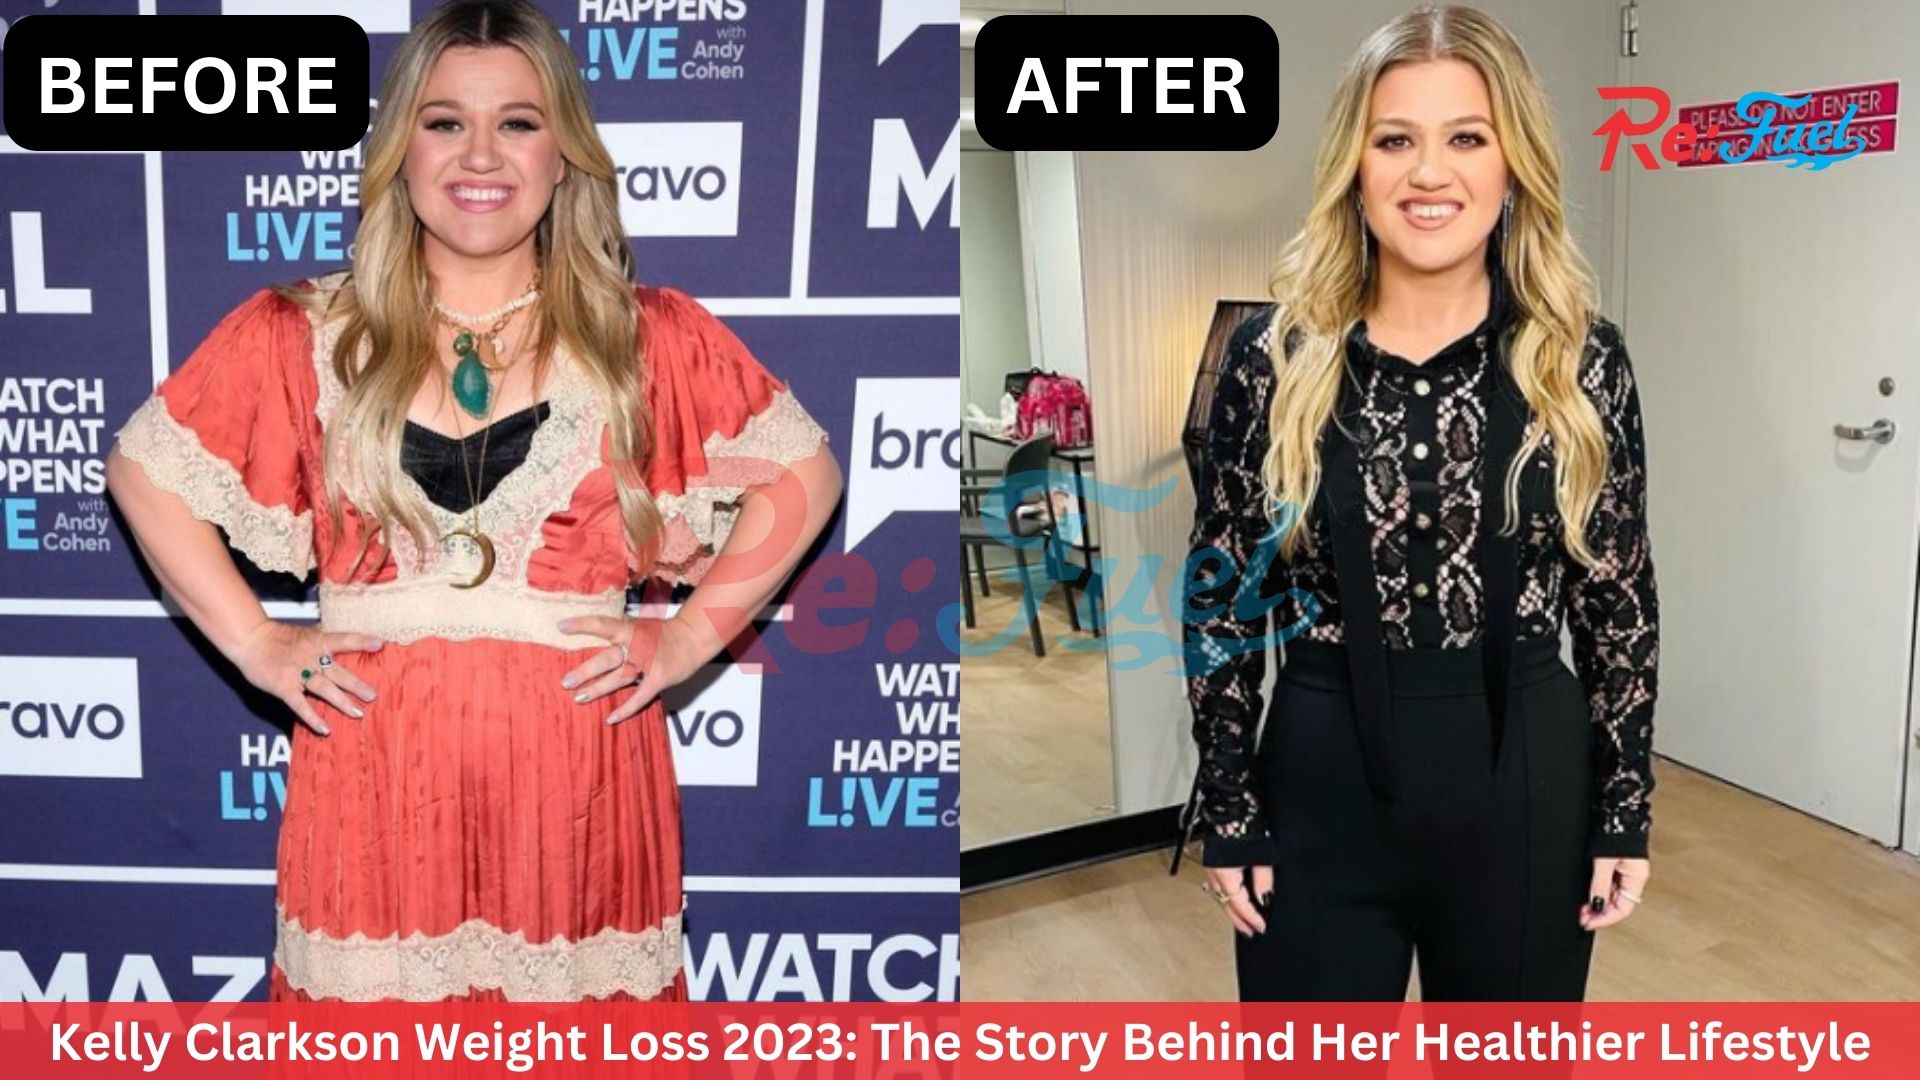 Kelly Clarkson Weight Loss 2023: The Story Behind Her Healthier Lifestyle